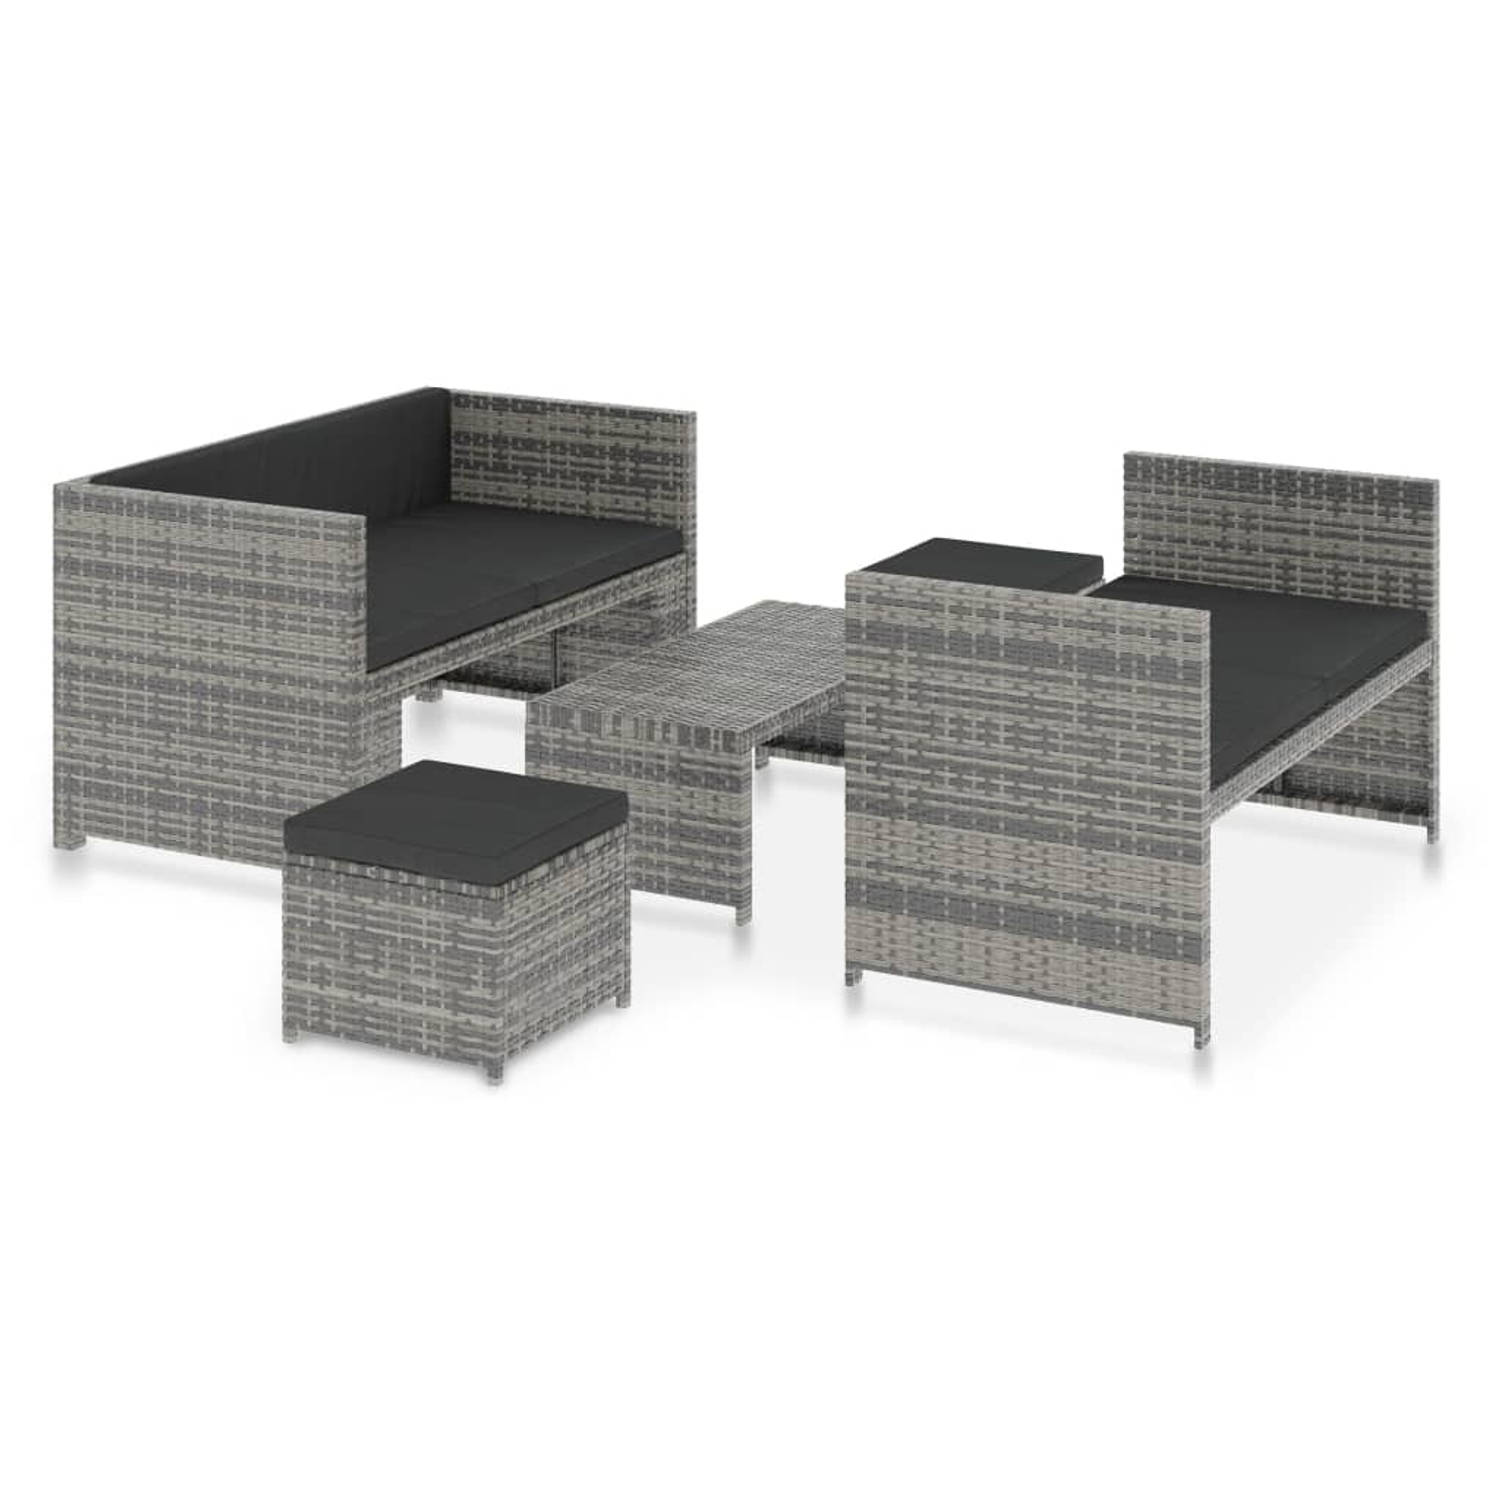 The Living Store Loungeset - Grijs Poly Rattan - Stalen frame - 5-delig - 130x70x70 cm - 130.5x65x70.5 cm - 41.5x41.5x31 cm - 95.5x45x35 cm